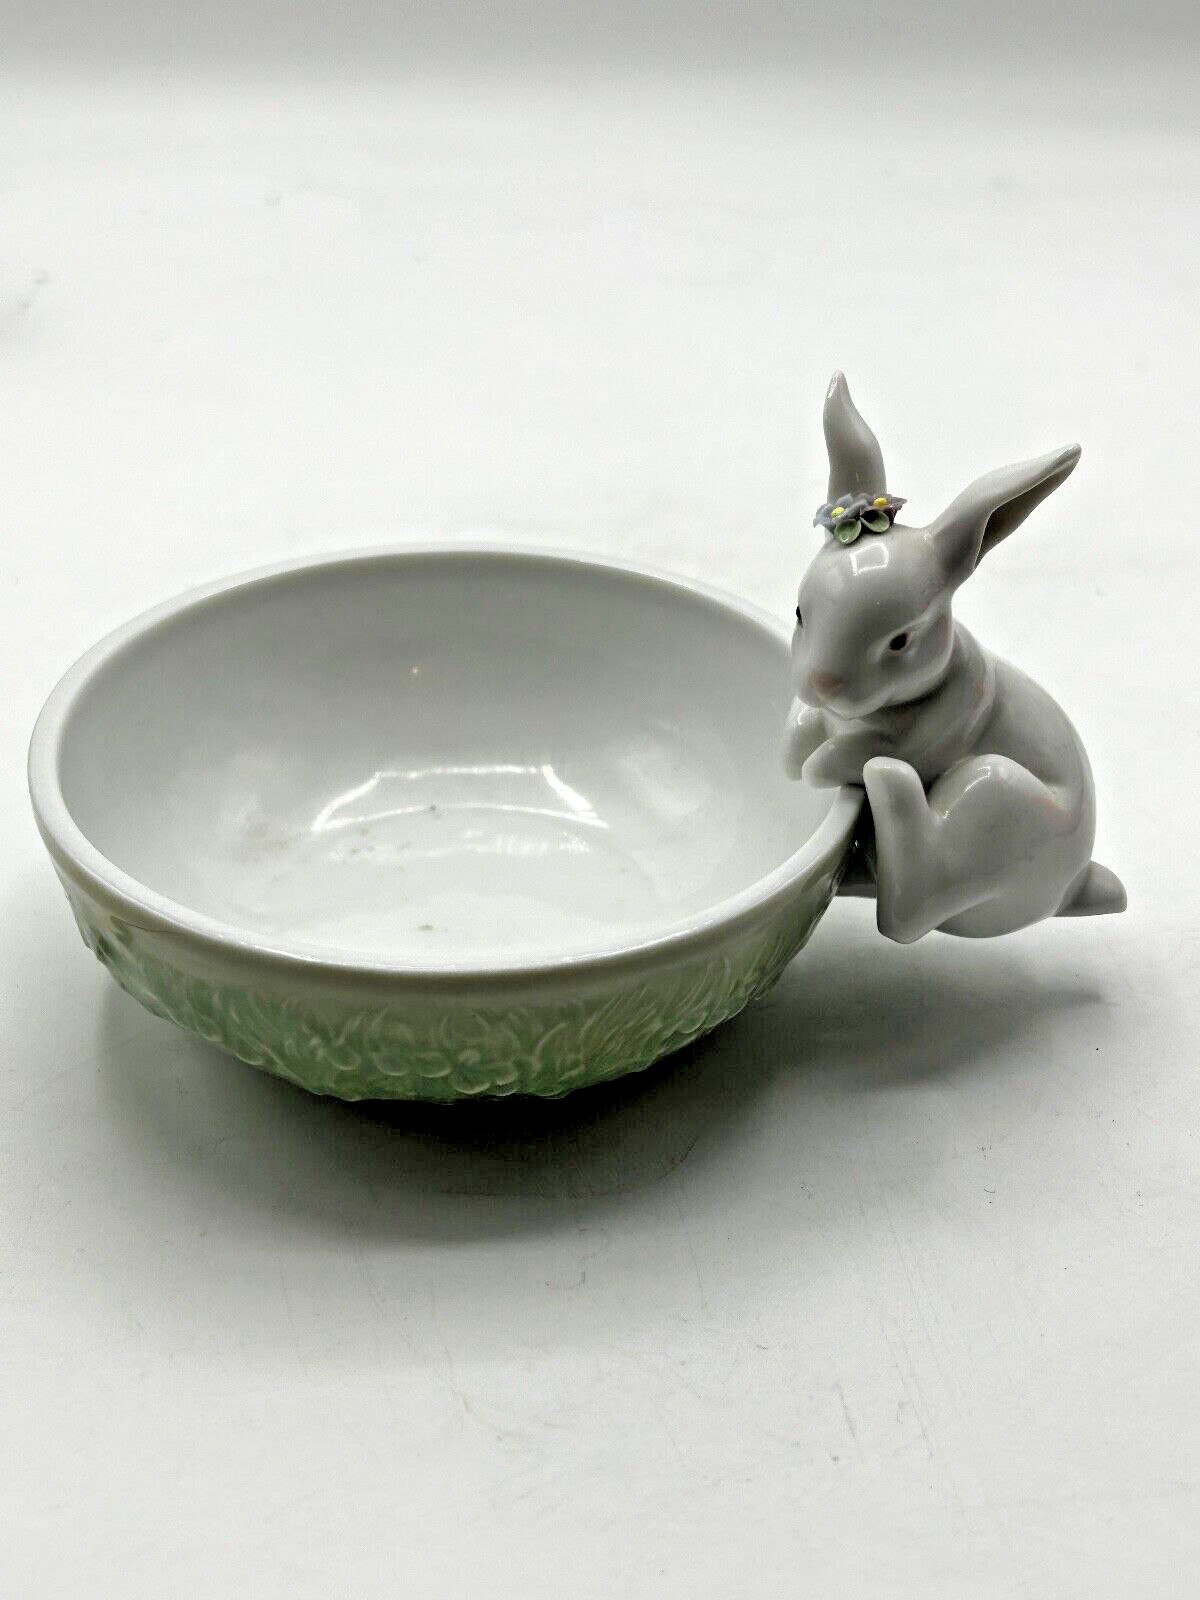 Lladro small bowl with Bunny peeking over the rim Retiered, Perfect for Easter